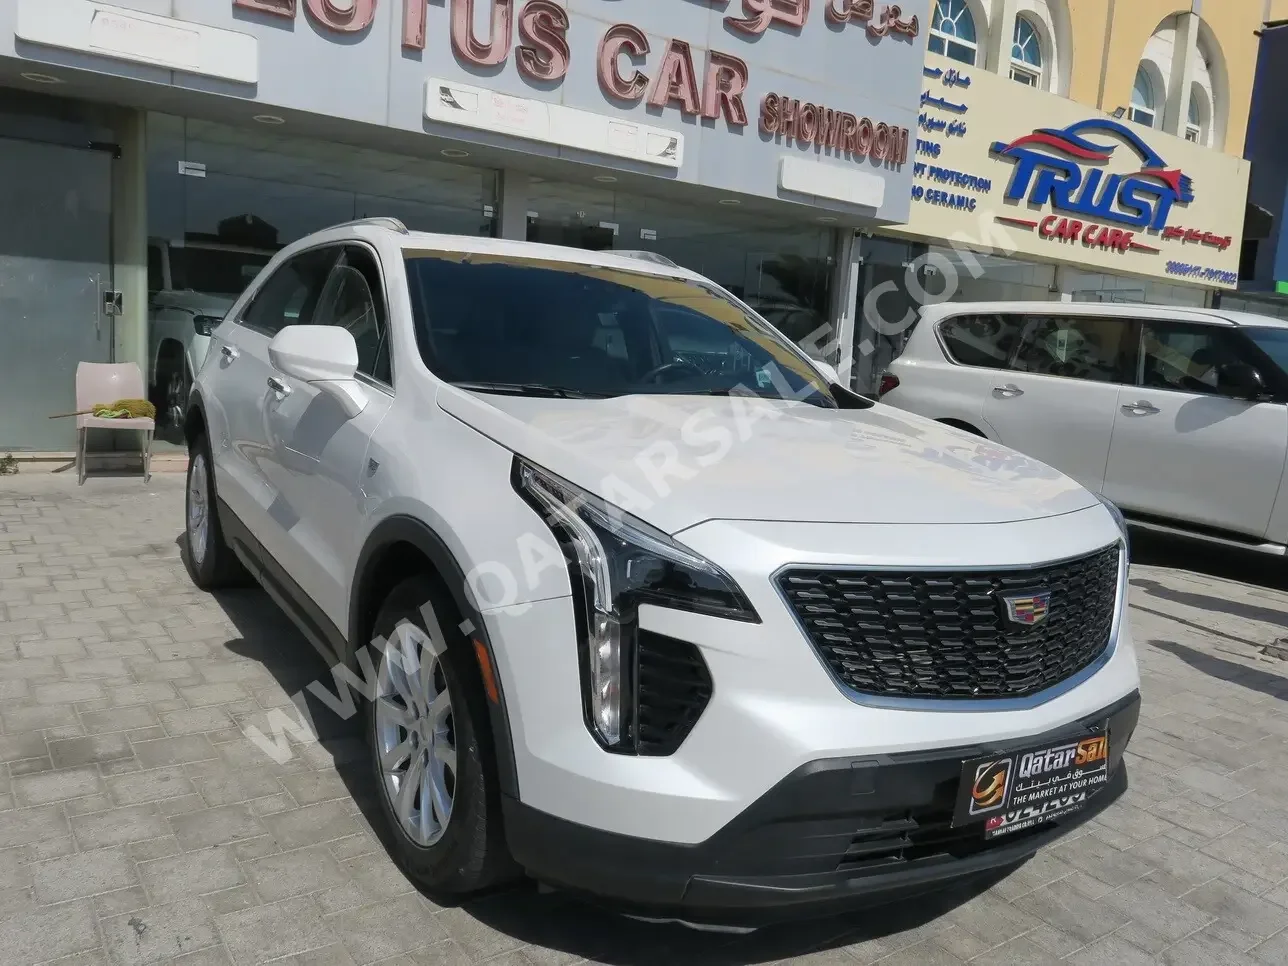  Cadillac  XT4  2020  Automatic  32,000 Km  6 Cylinder  All Wheel Drive (AWD)  SUV  White  With Warranty